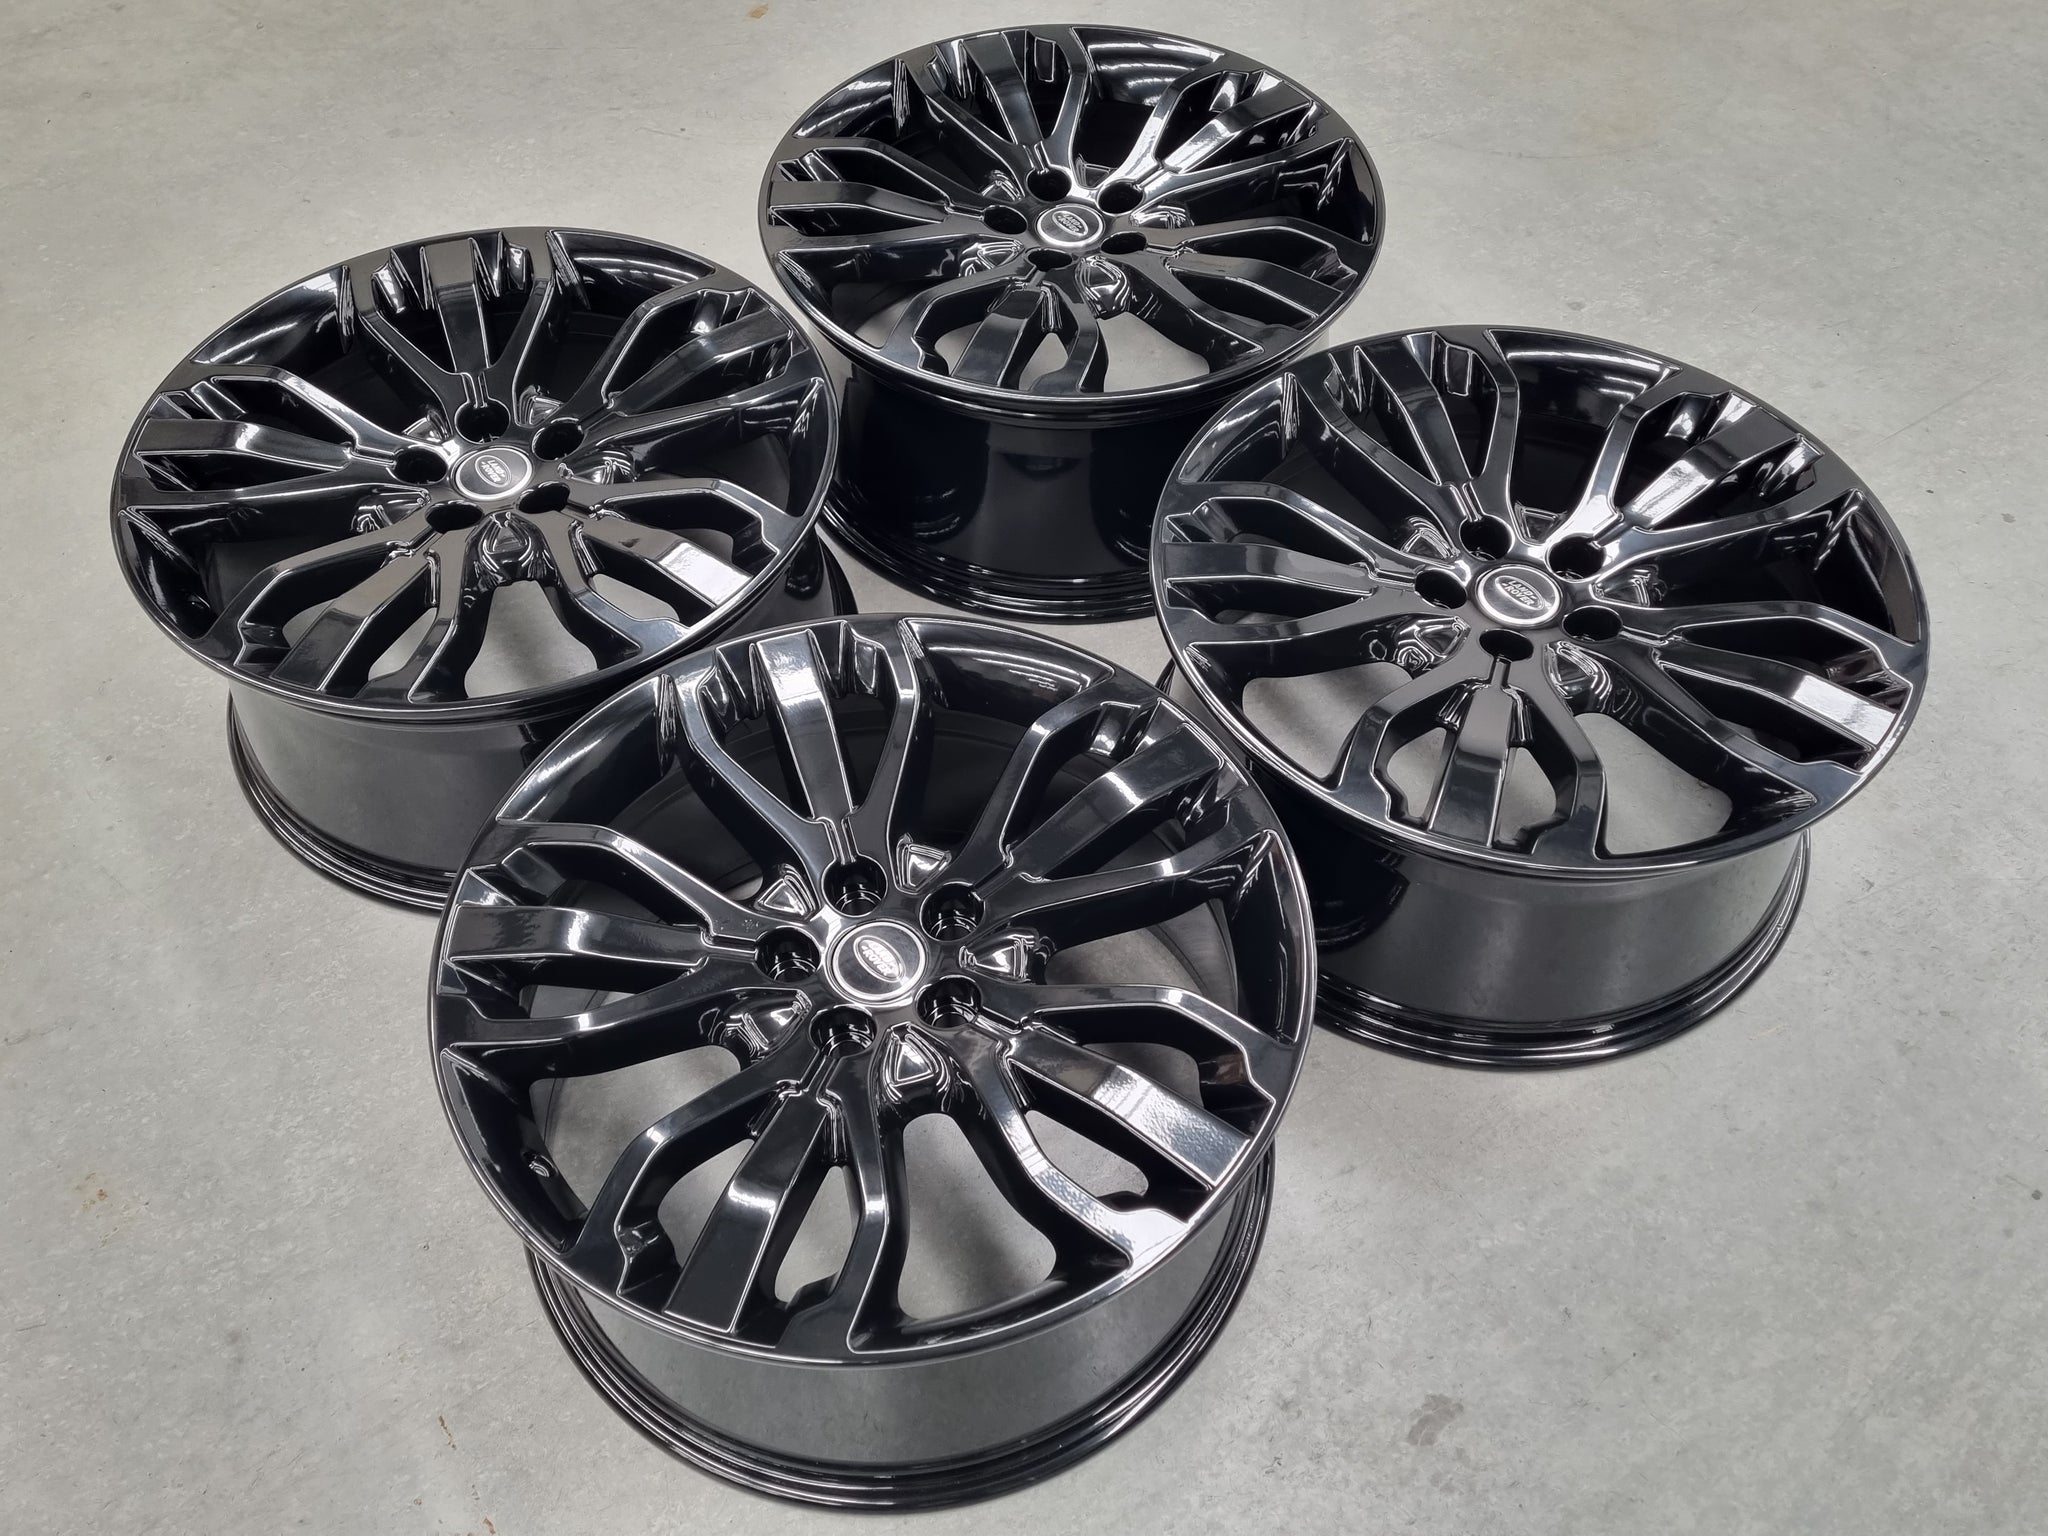 Load image into Gallery viewer, Genuine Range Rover Sport 21 Inch DK62 Black Alloy Wheels Set of 4
